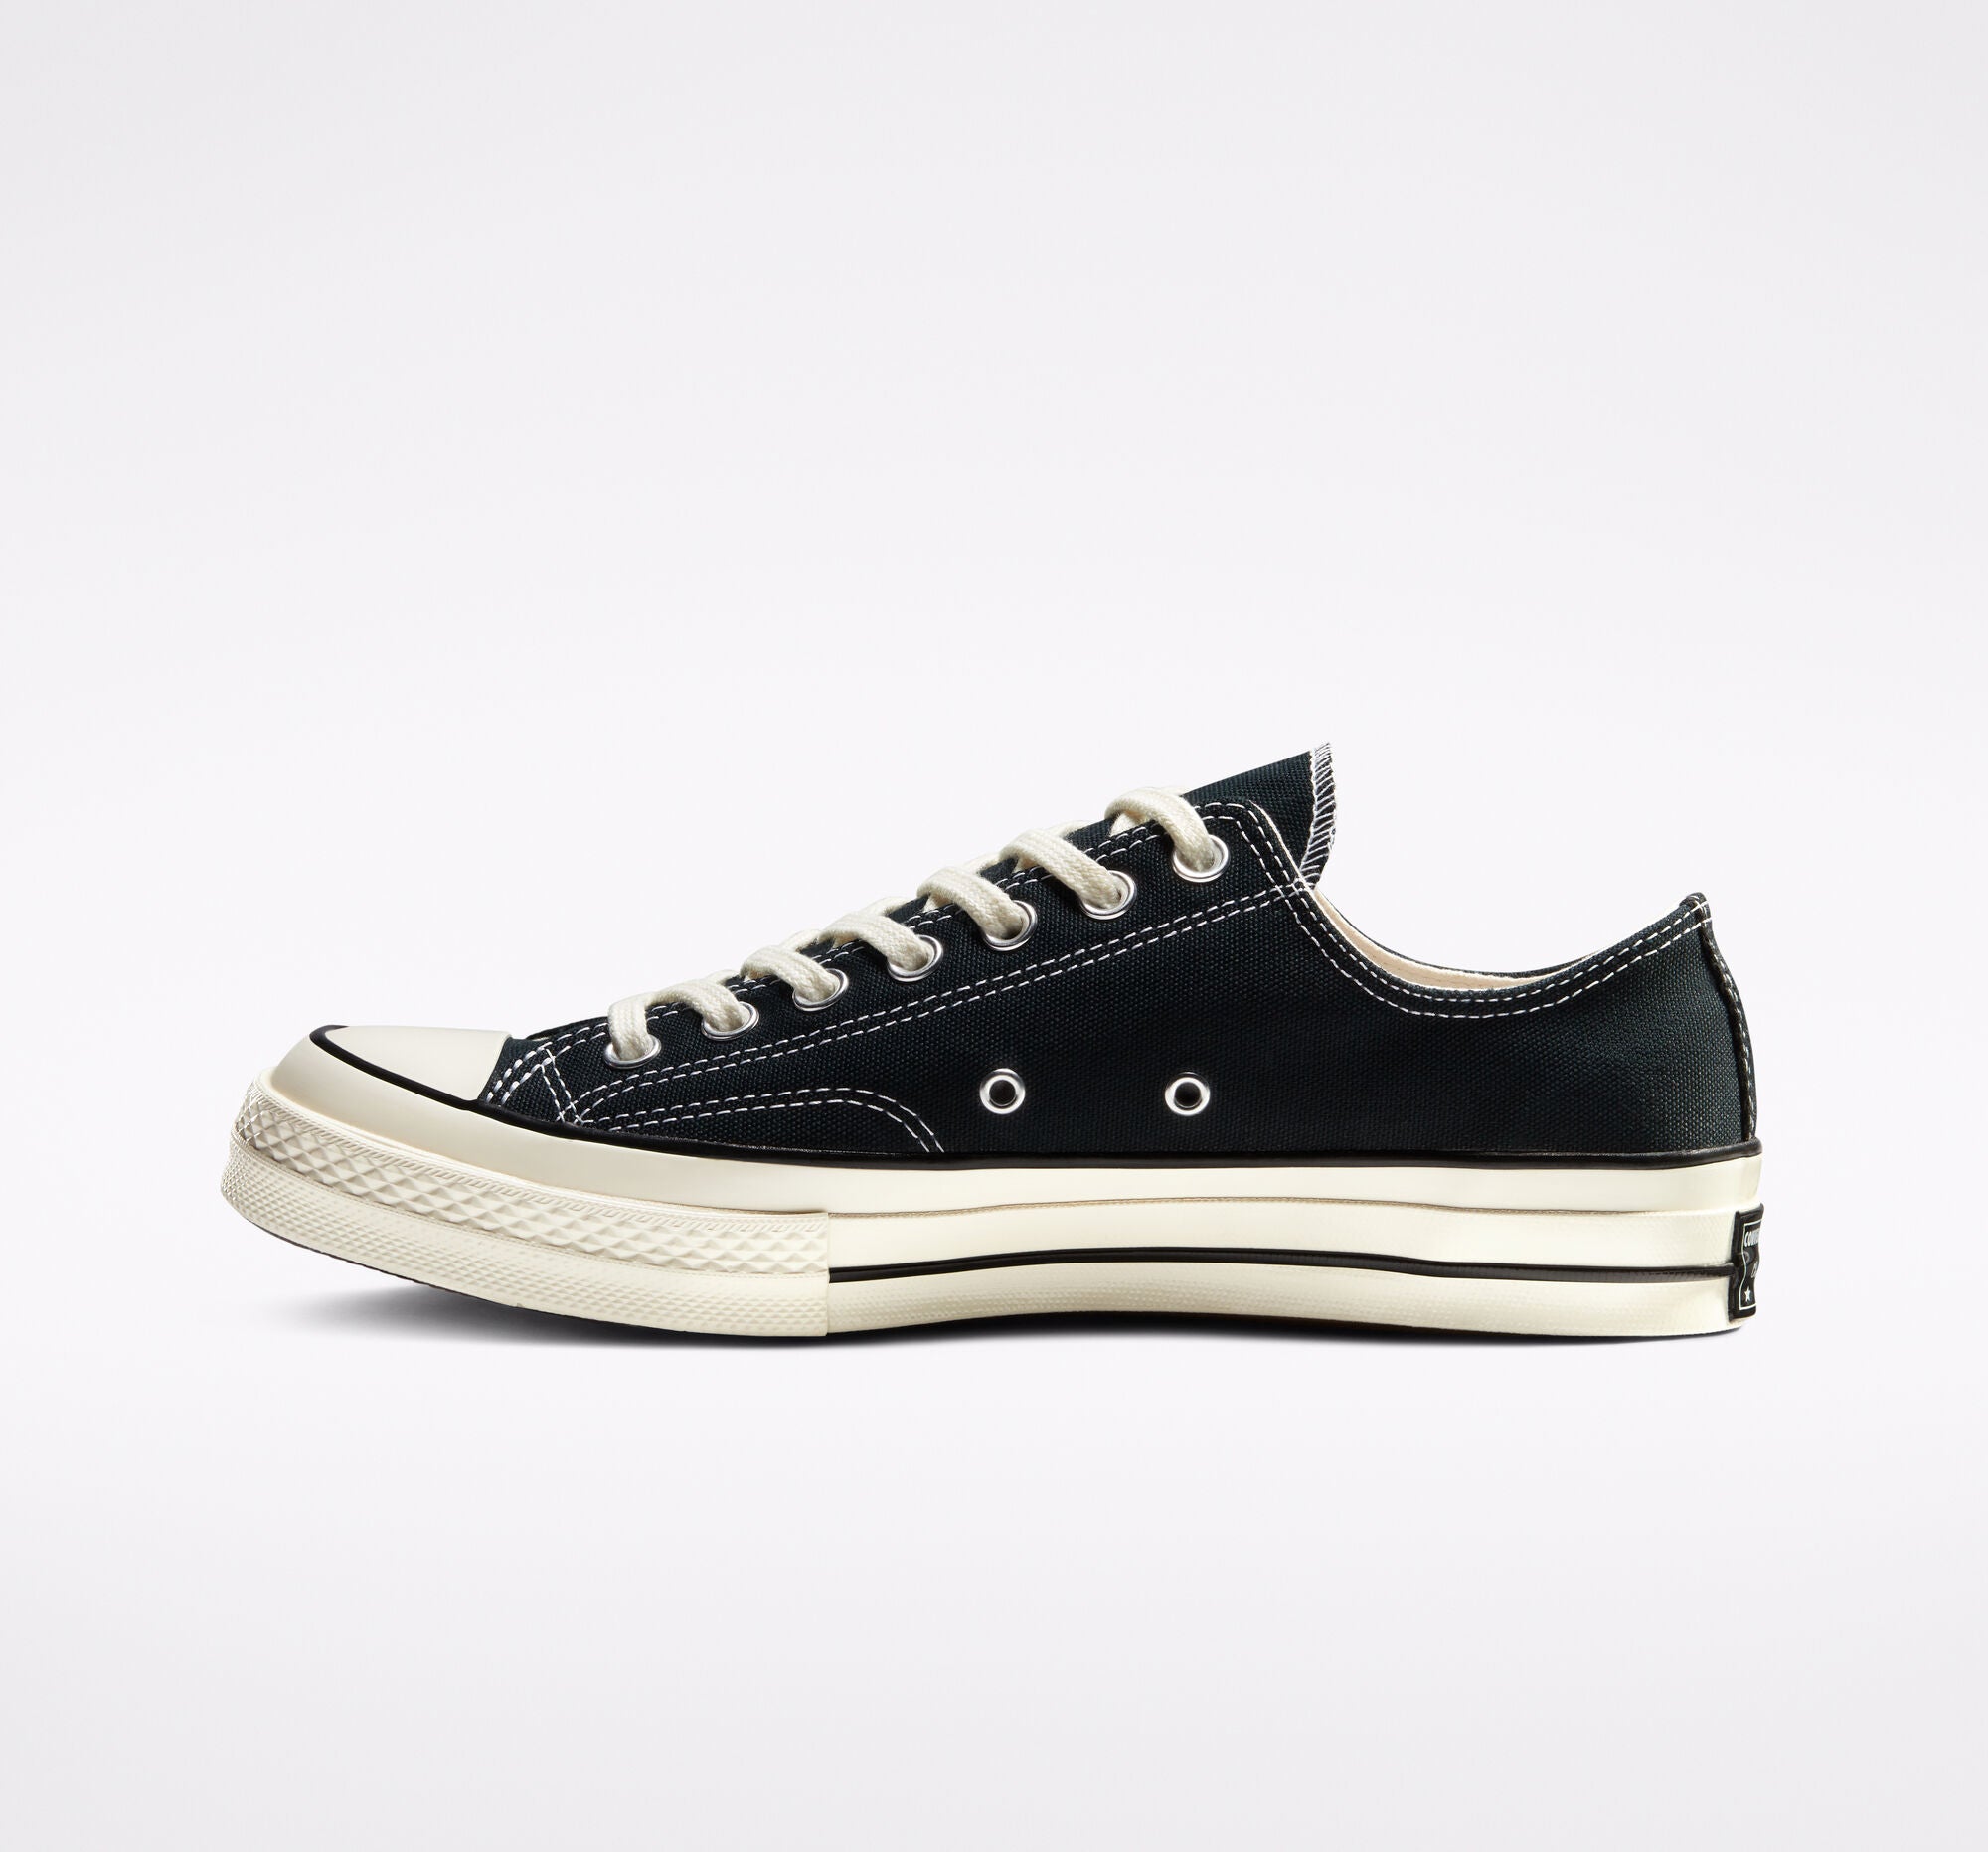 CONVERSE CHUCK TAYLOR ALL STAR 70 OX 162058C – leftfoot.sg